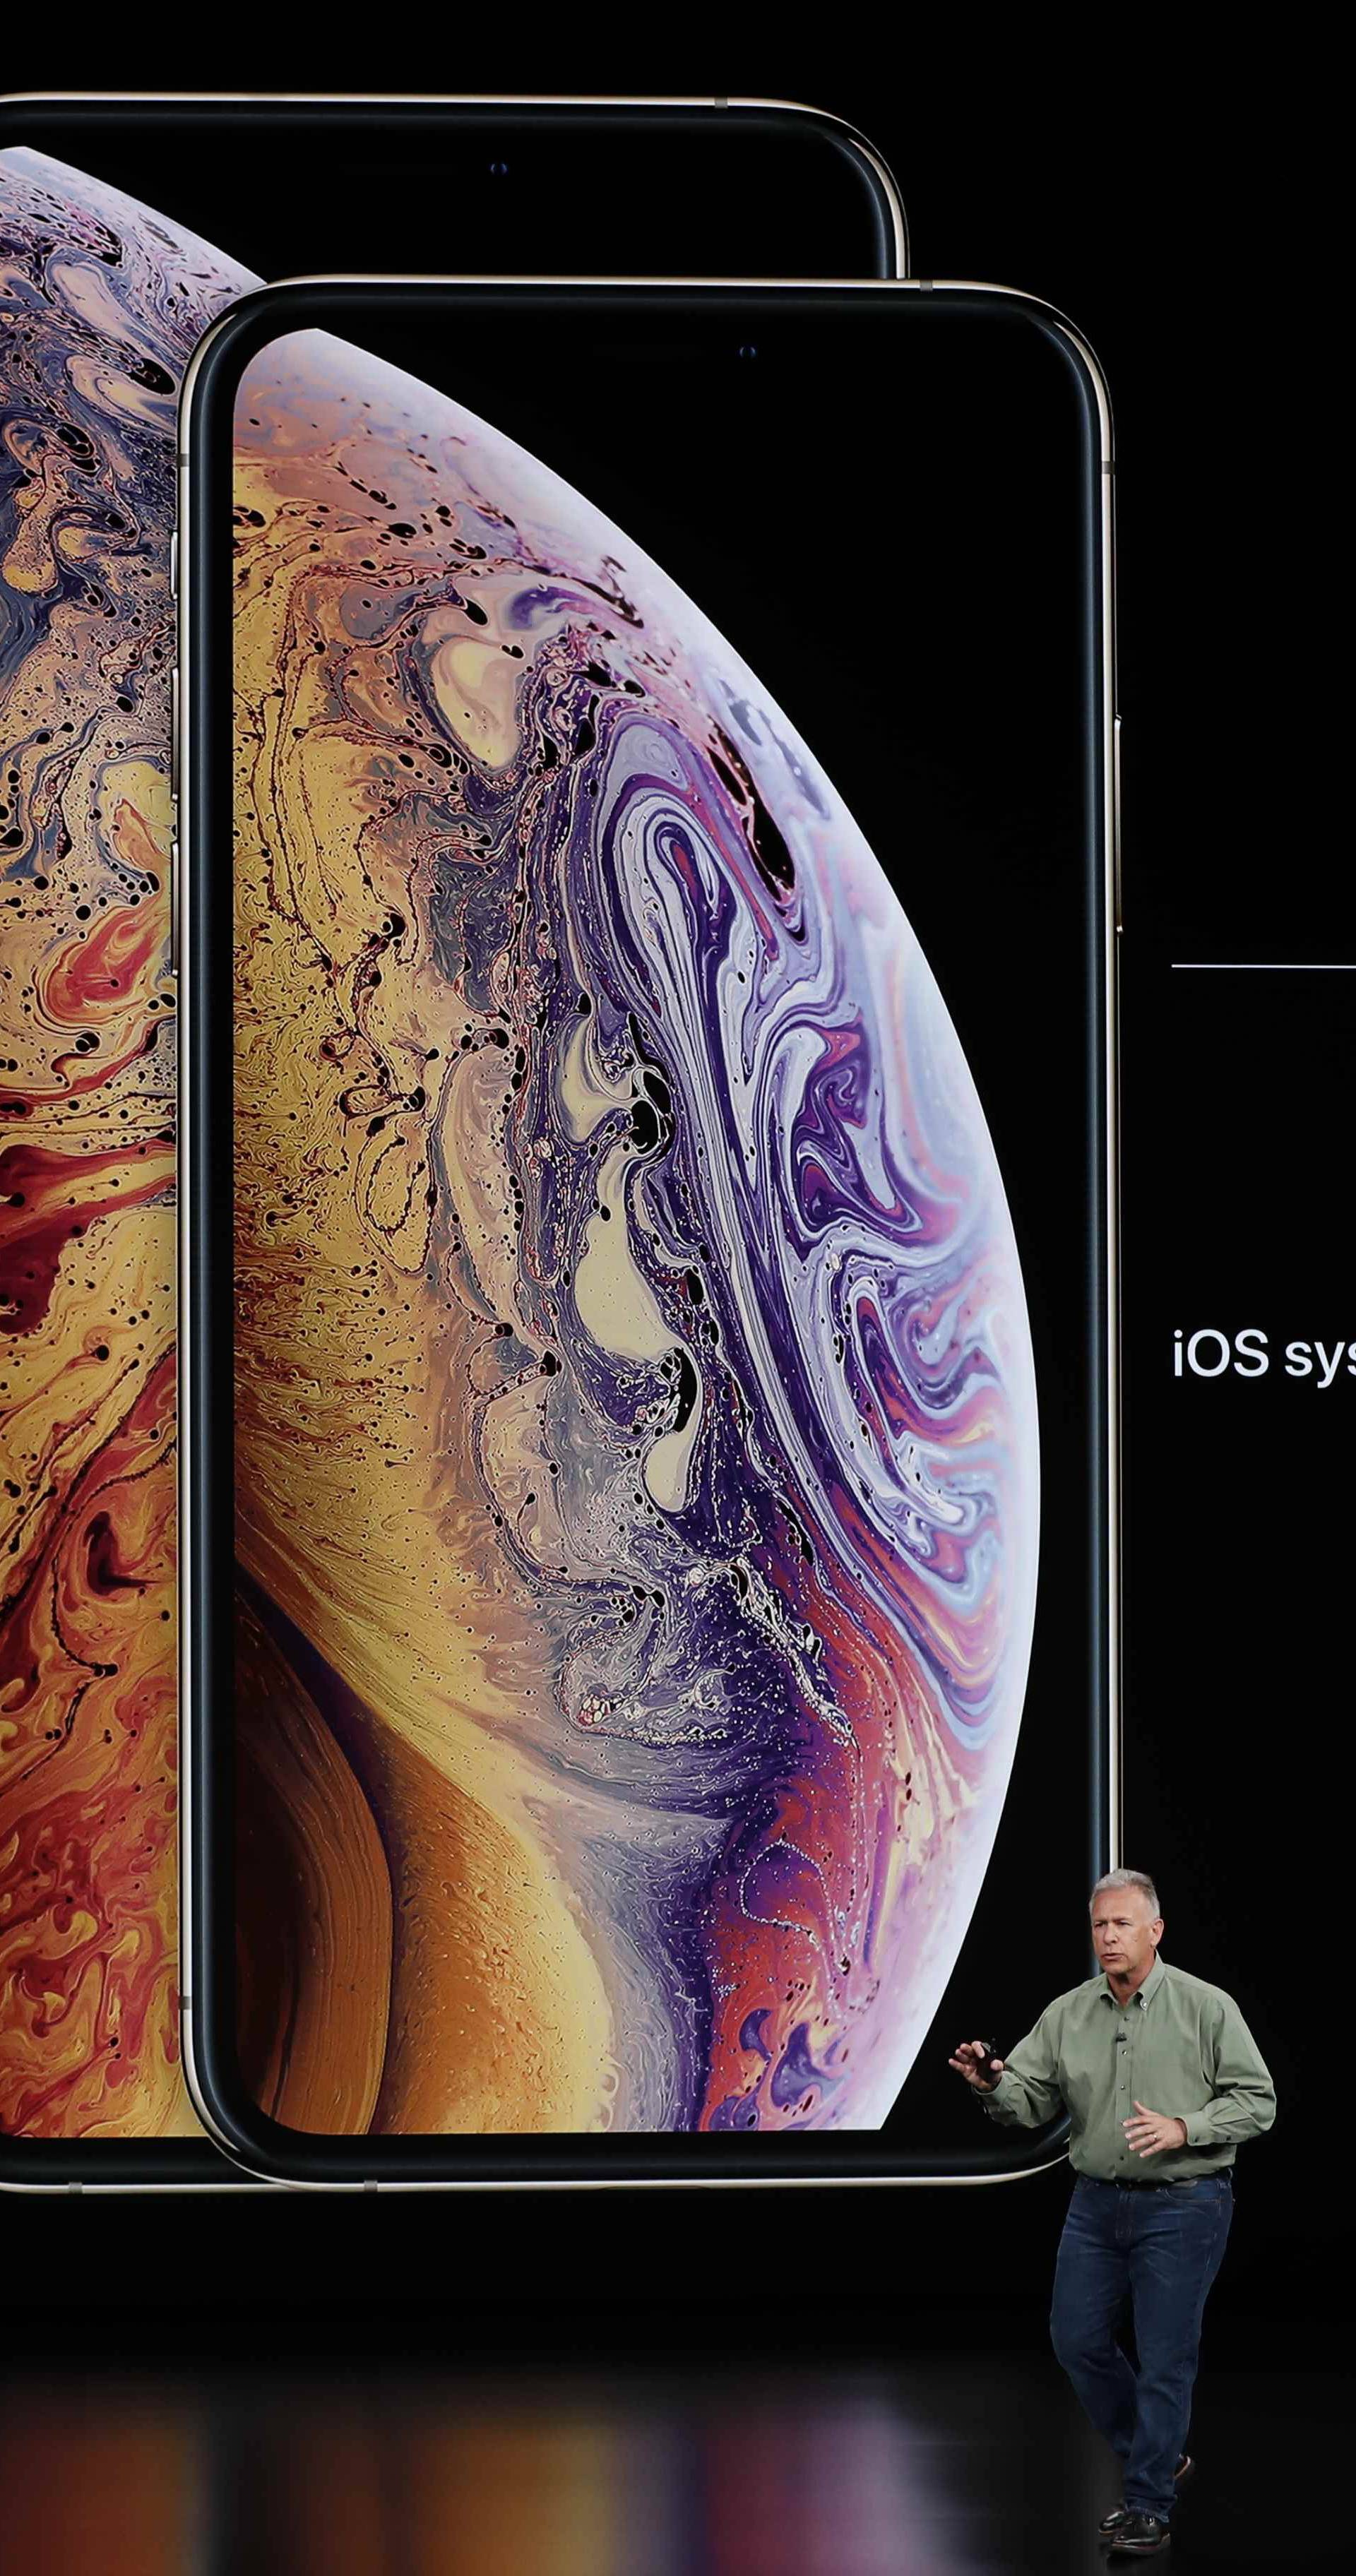 Schiller Senior Vice President, Worldwide Marketing of Apple, speaks about the the new Apple iPhone XS at an Apple Inc product launch in Cupertino